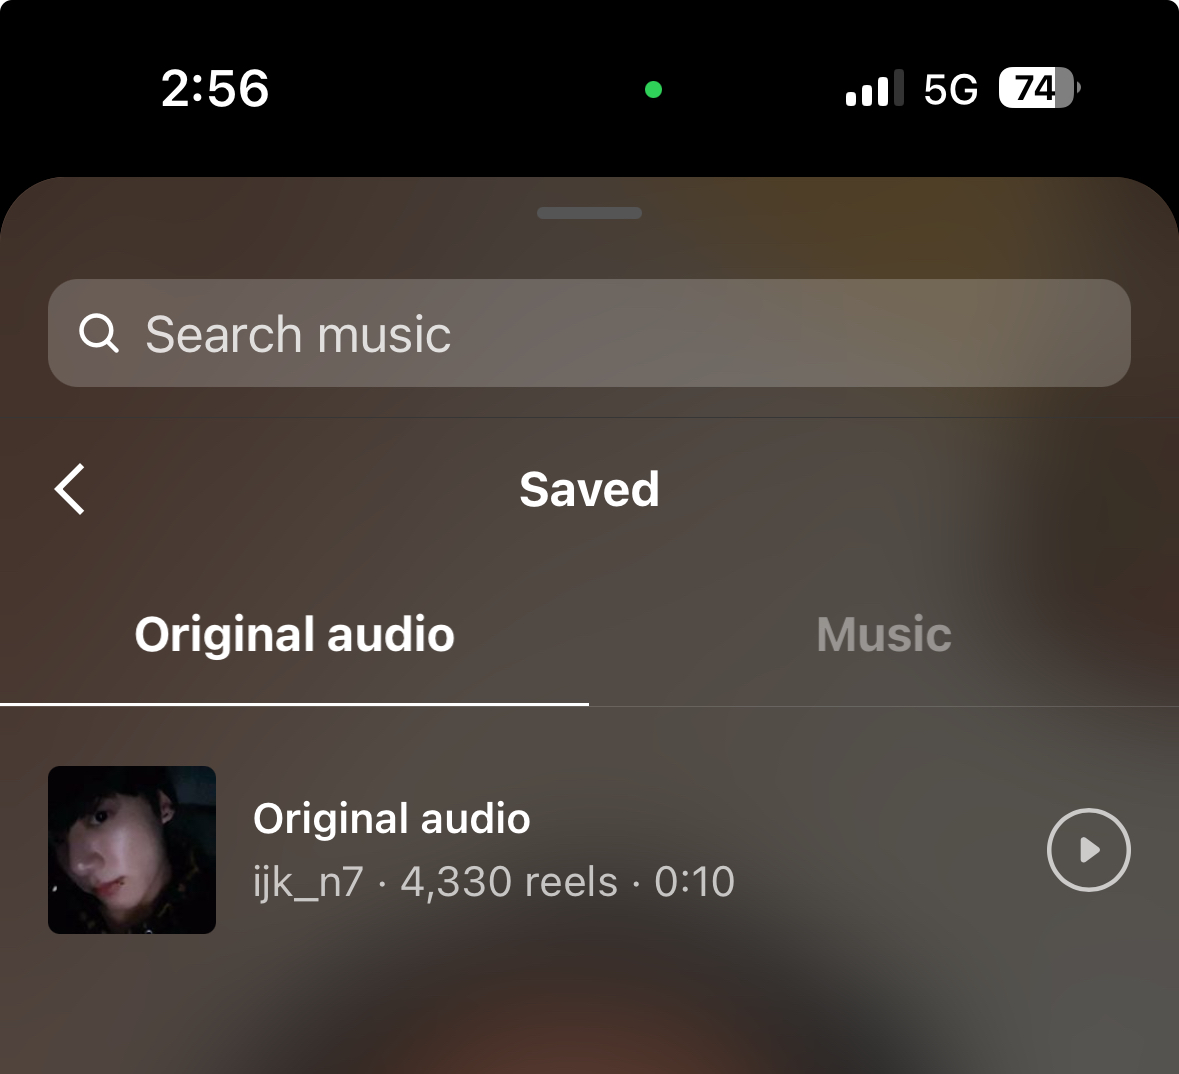 How to Save Music and Use the "Saved Music" Feature on Instagram 7